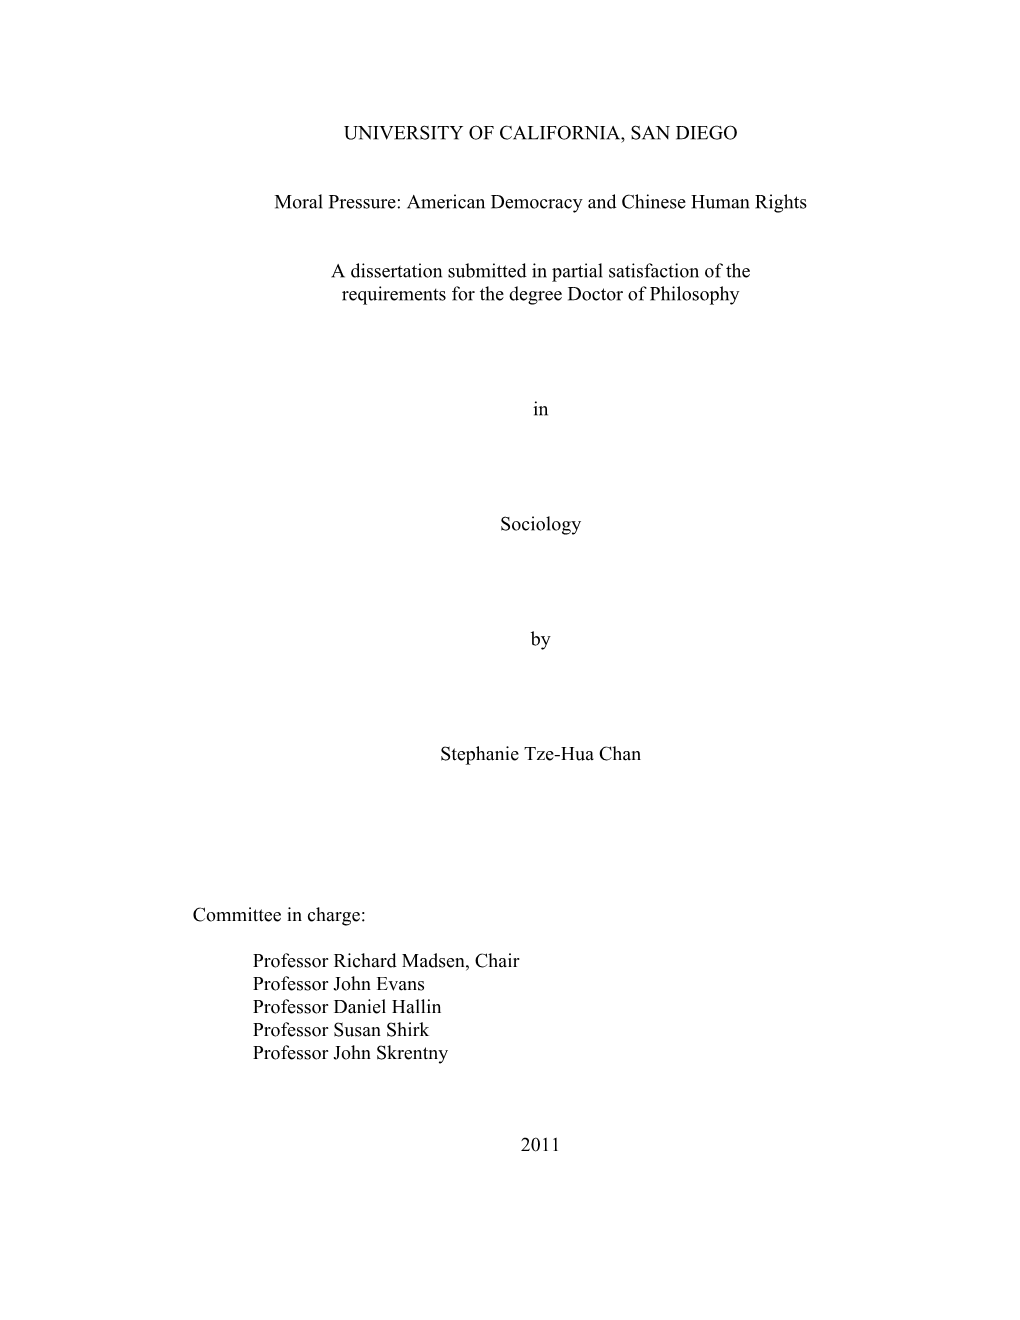 American Democracy and Chinese Human Rights a Dissertation